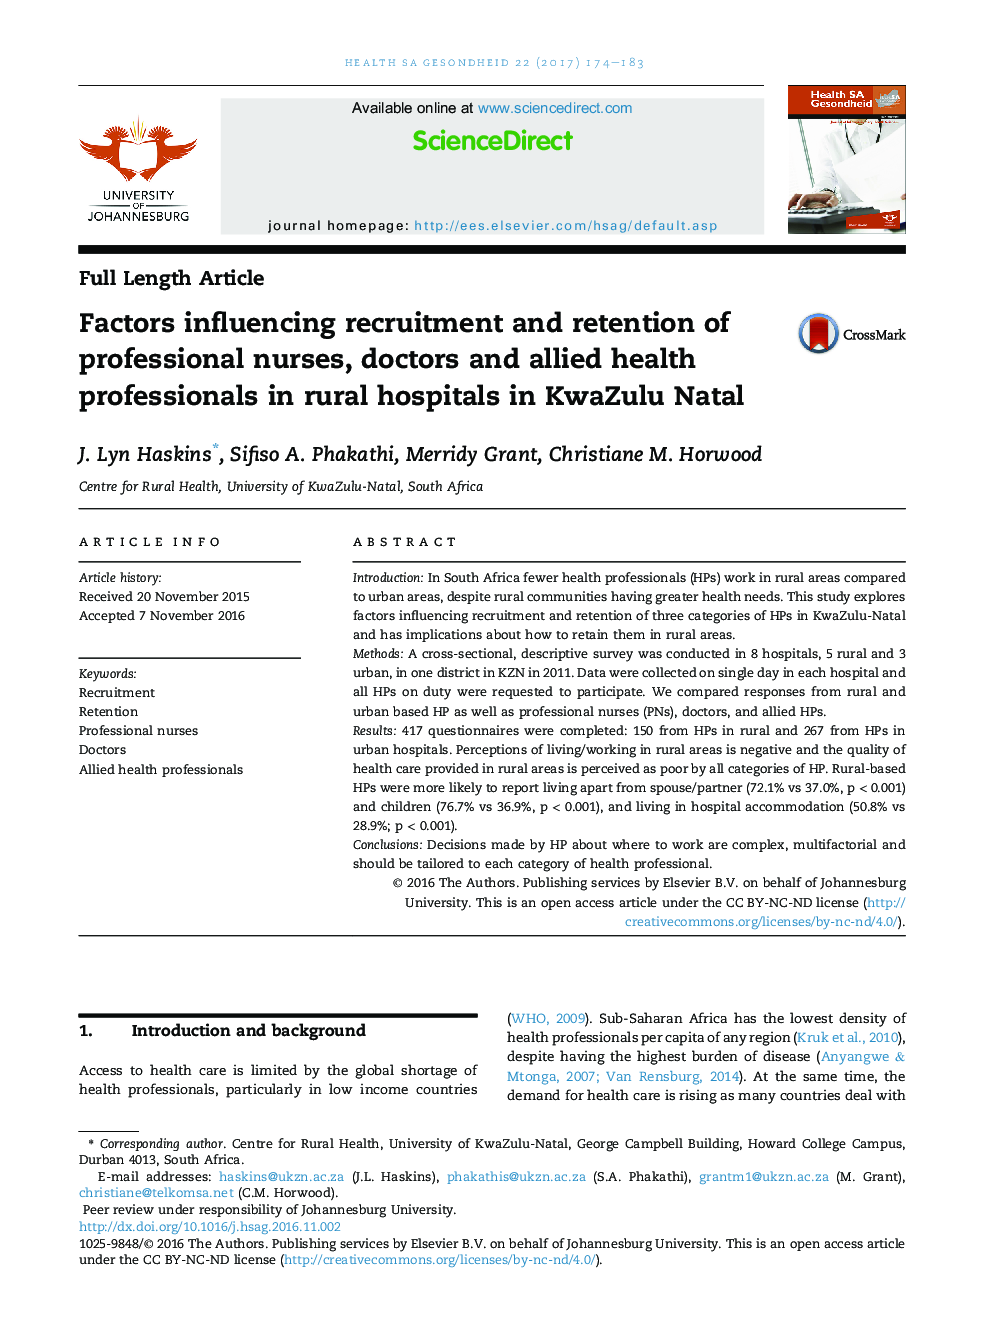 Factors influencing recruitment and retention of professional nurses, doctors and allied health professionals in rural hospitals in KwaZulu Natal